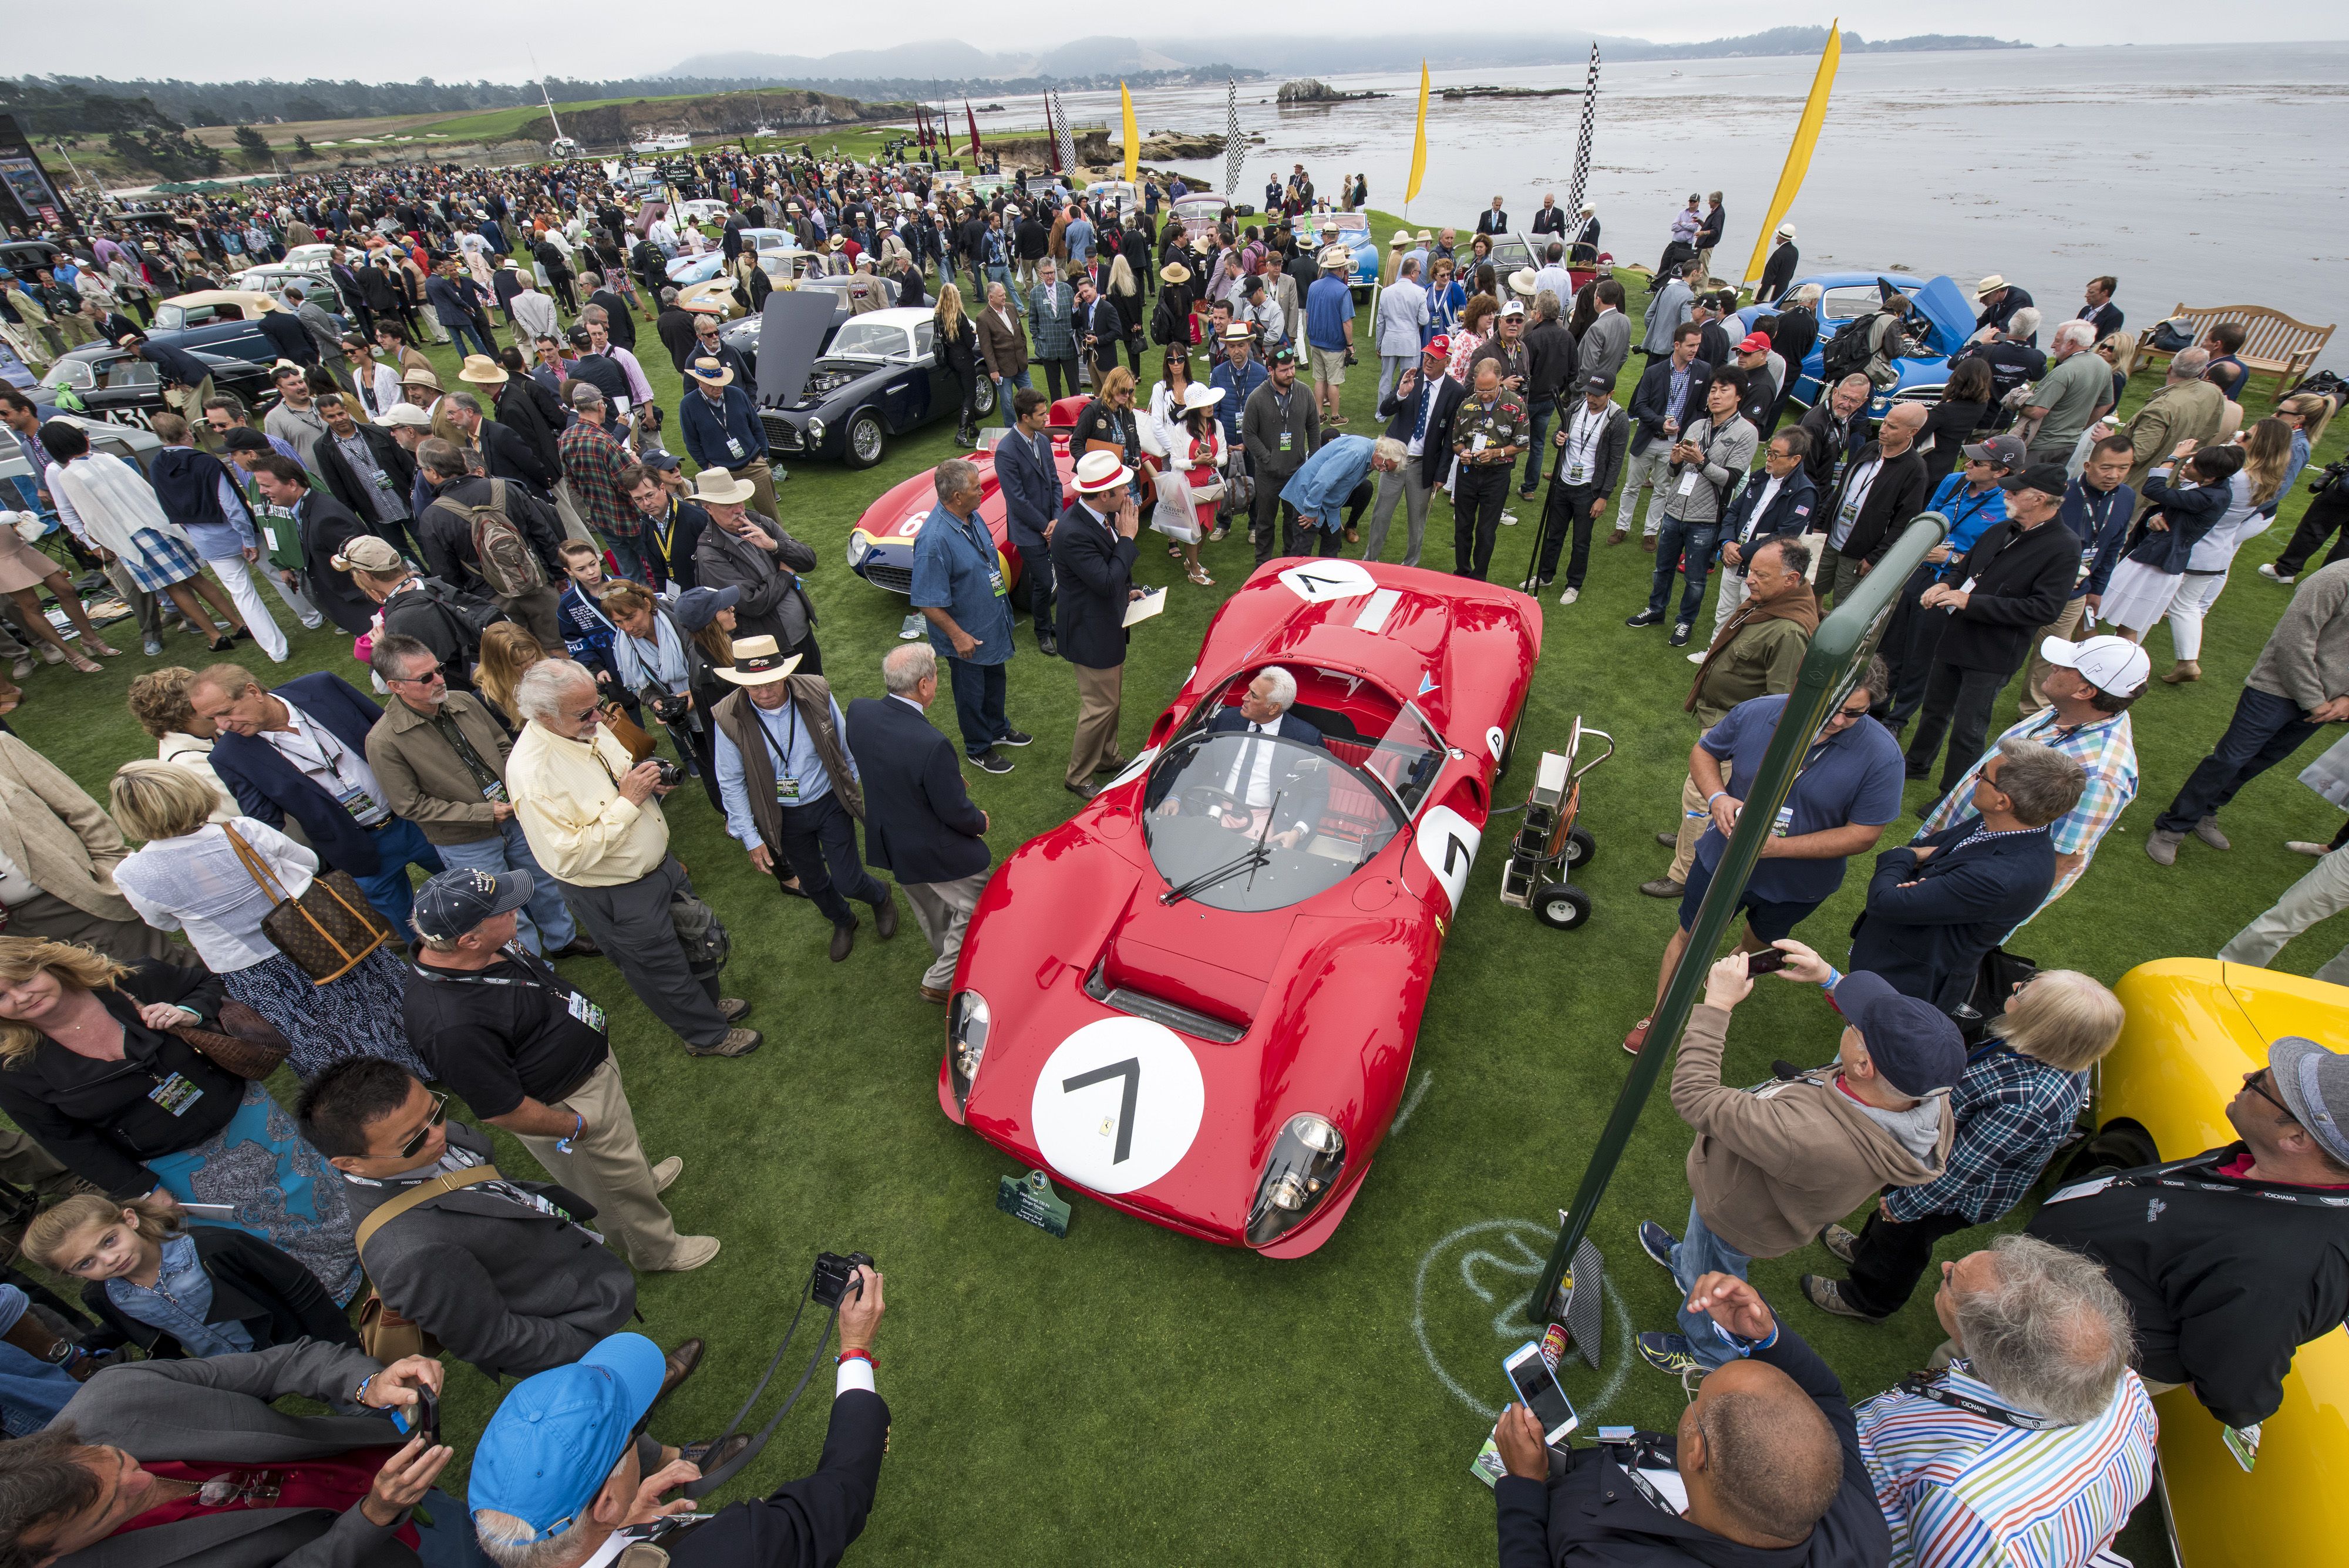 Pebble Beach car week isn't for budget travelers as event, hotel prices surge